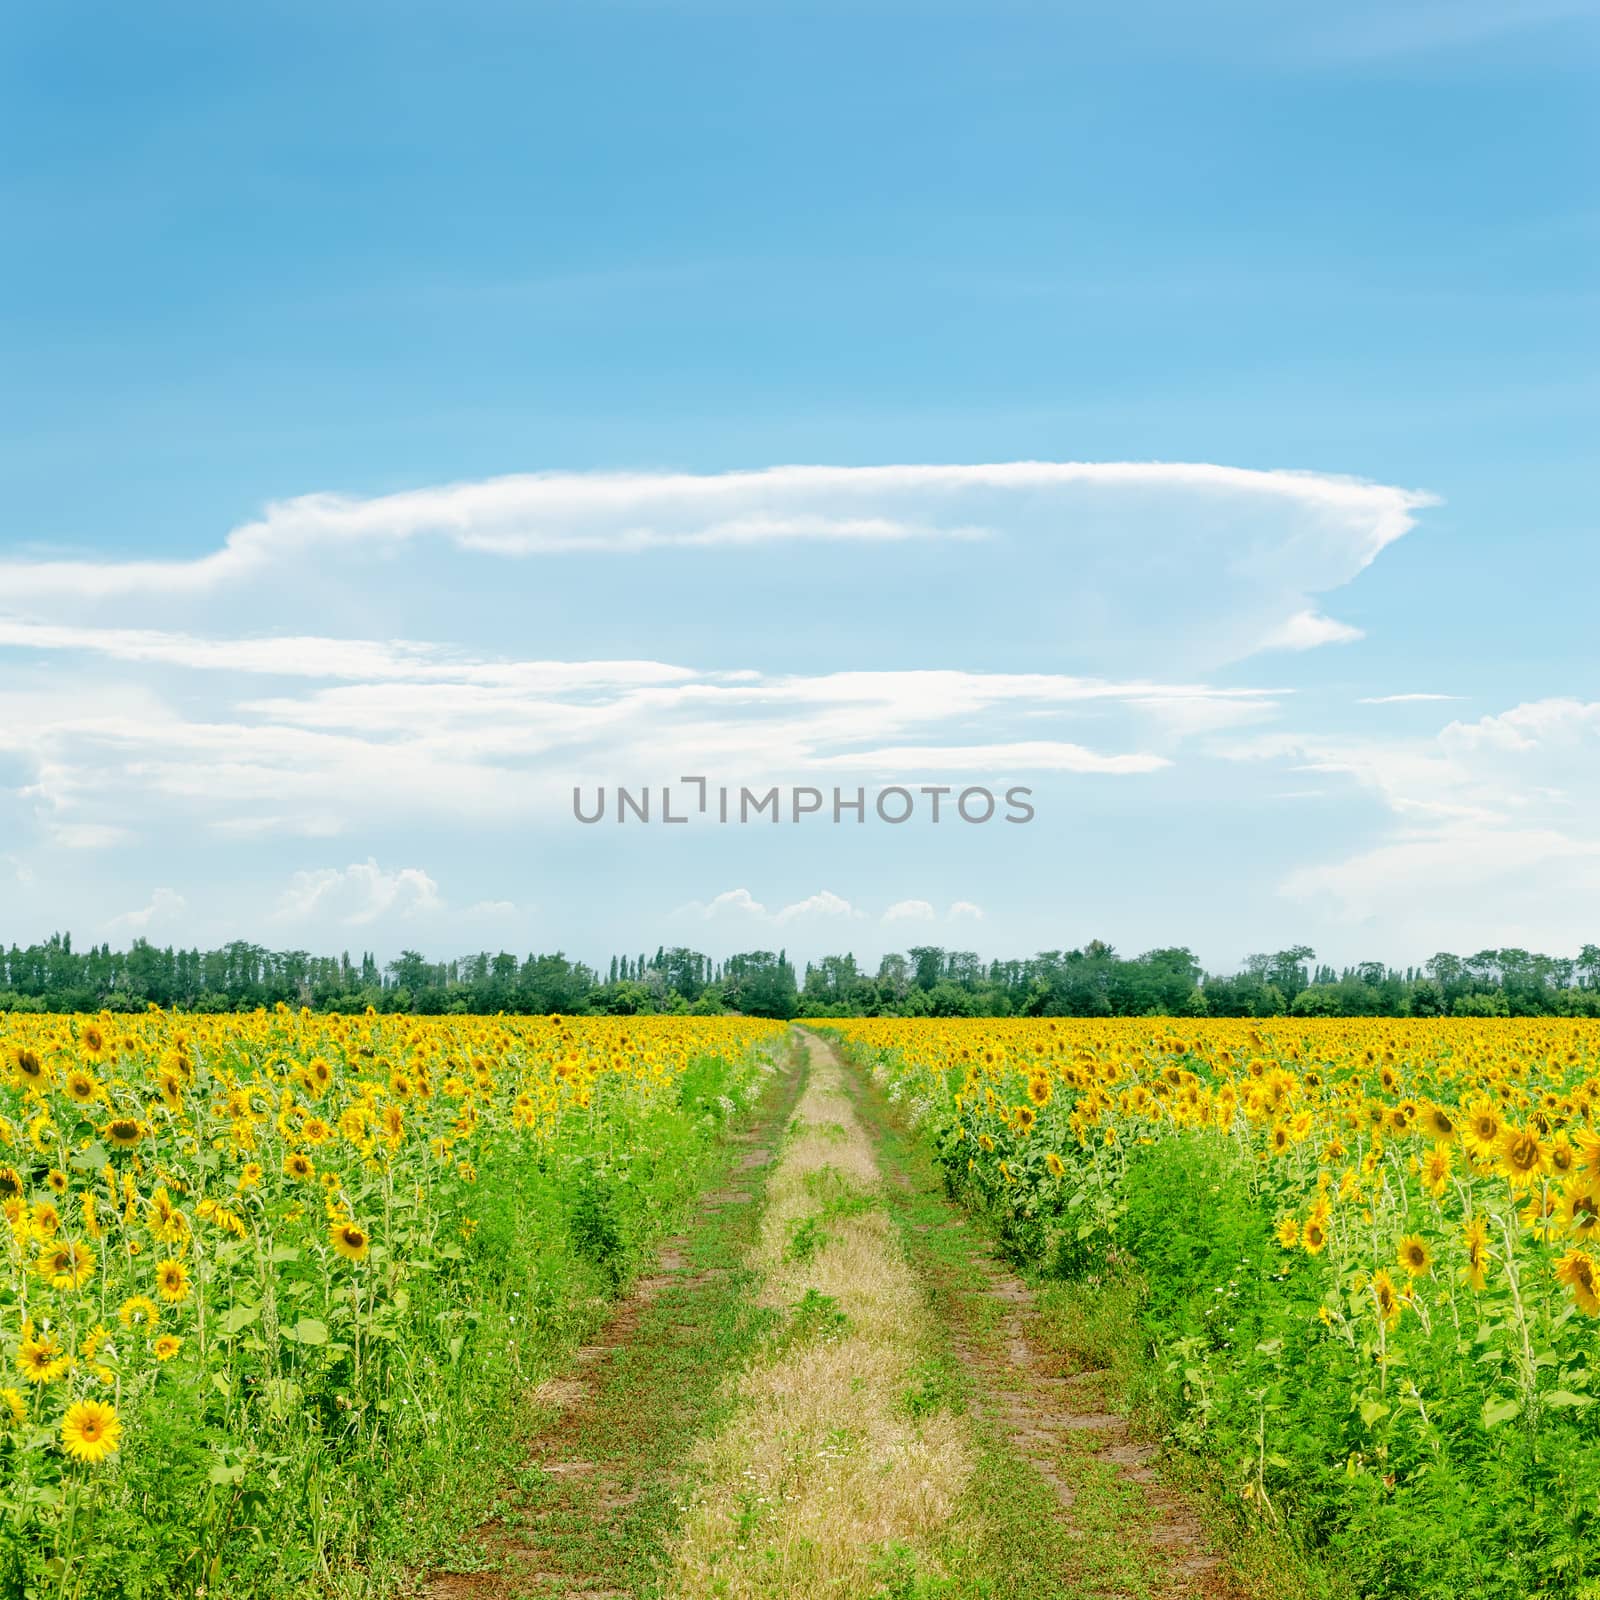 clouds on blue sky over road in sunflowers field